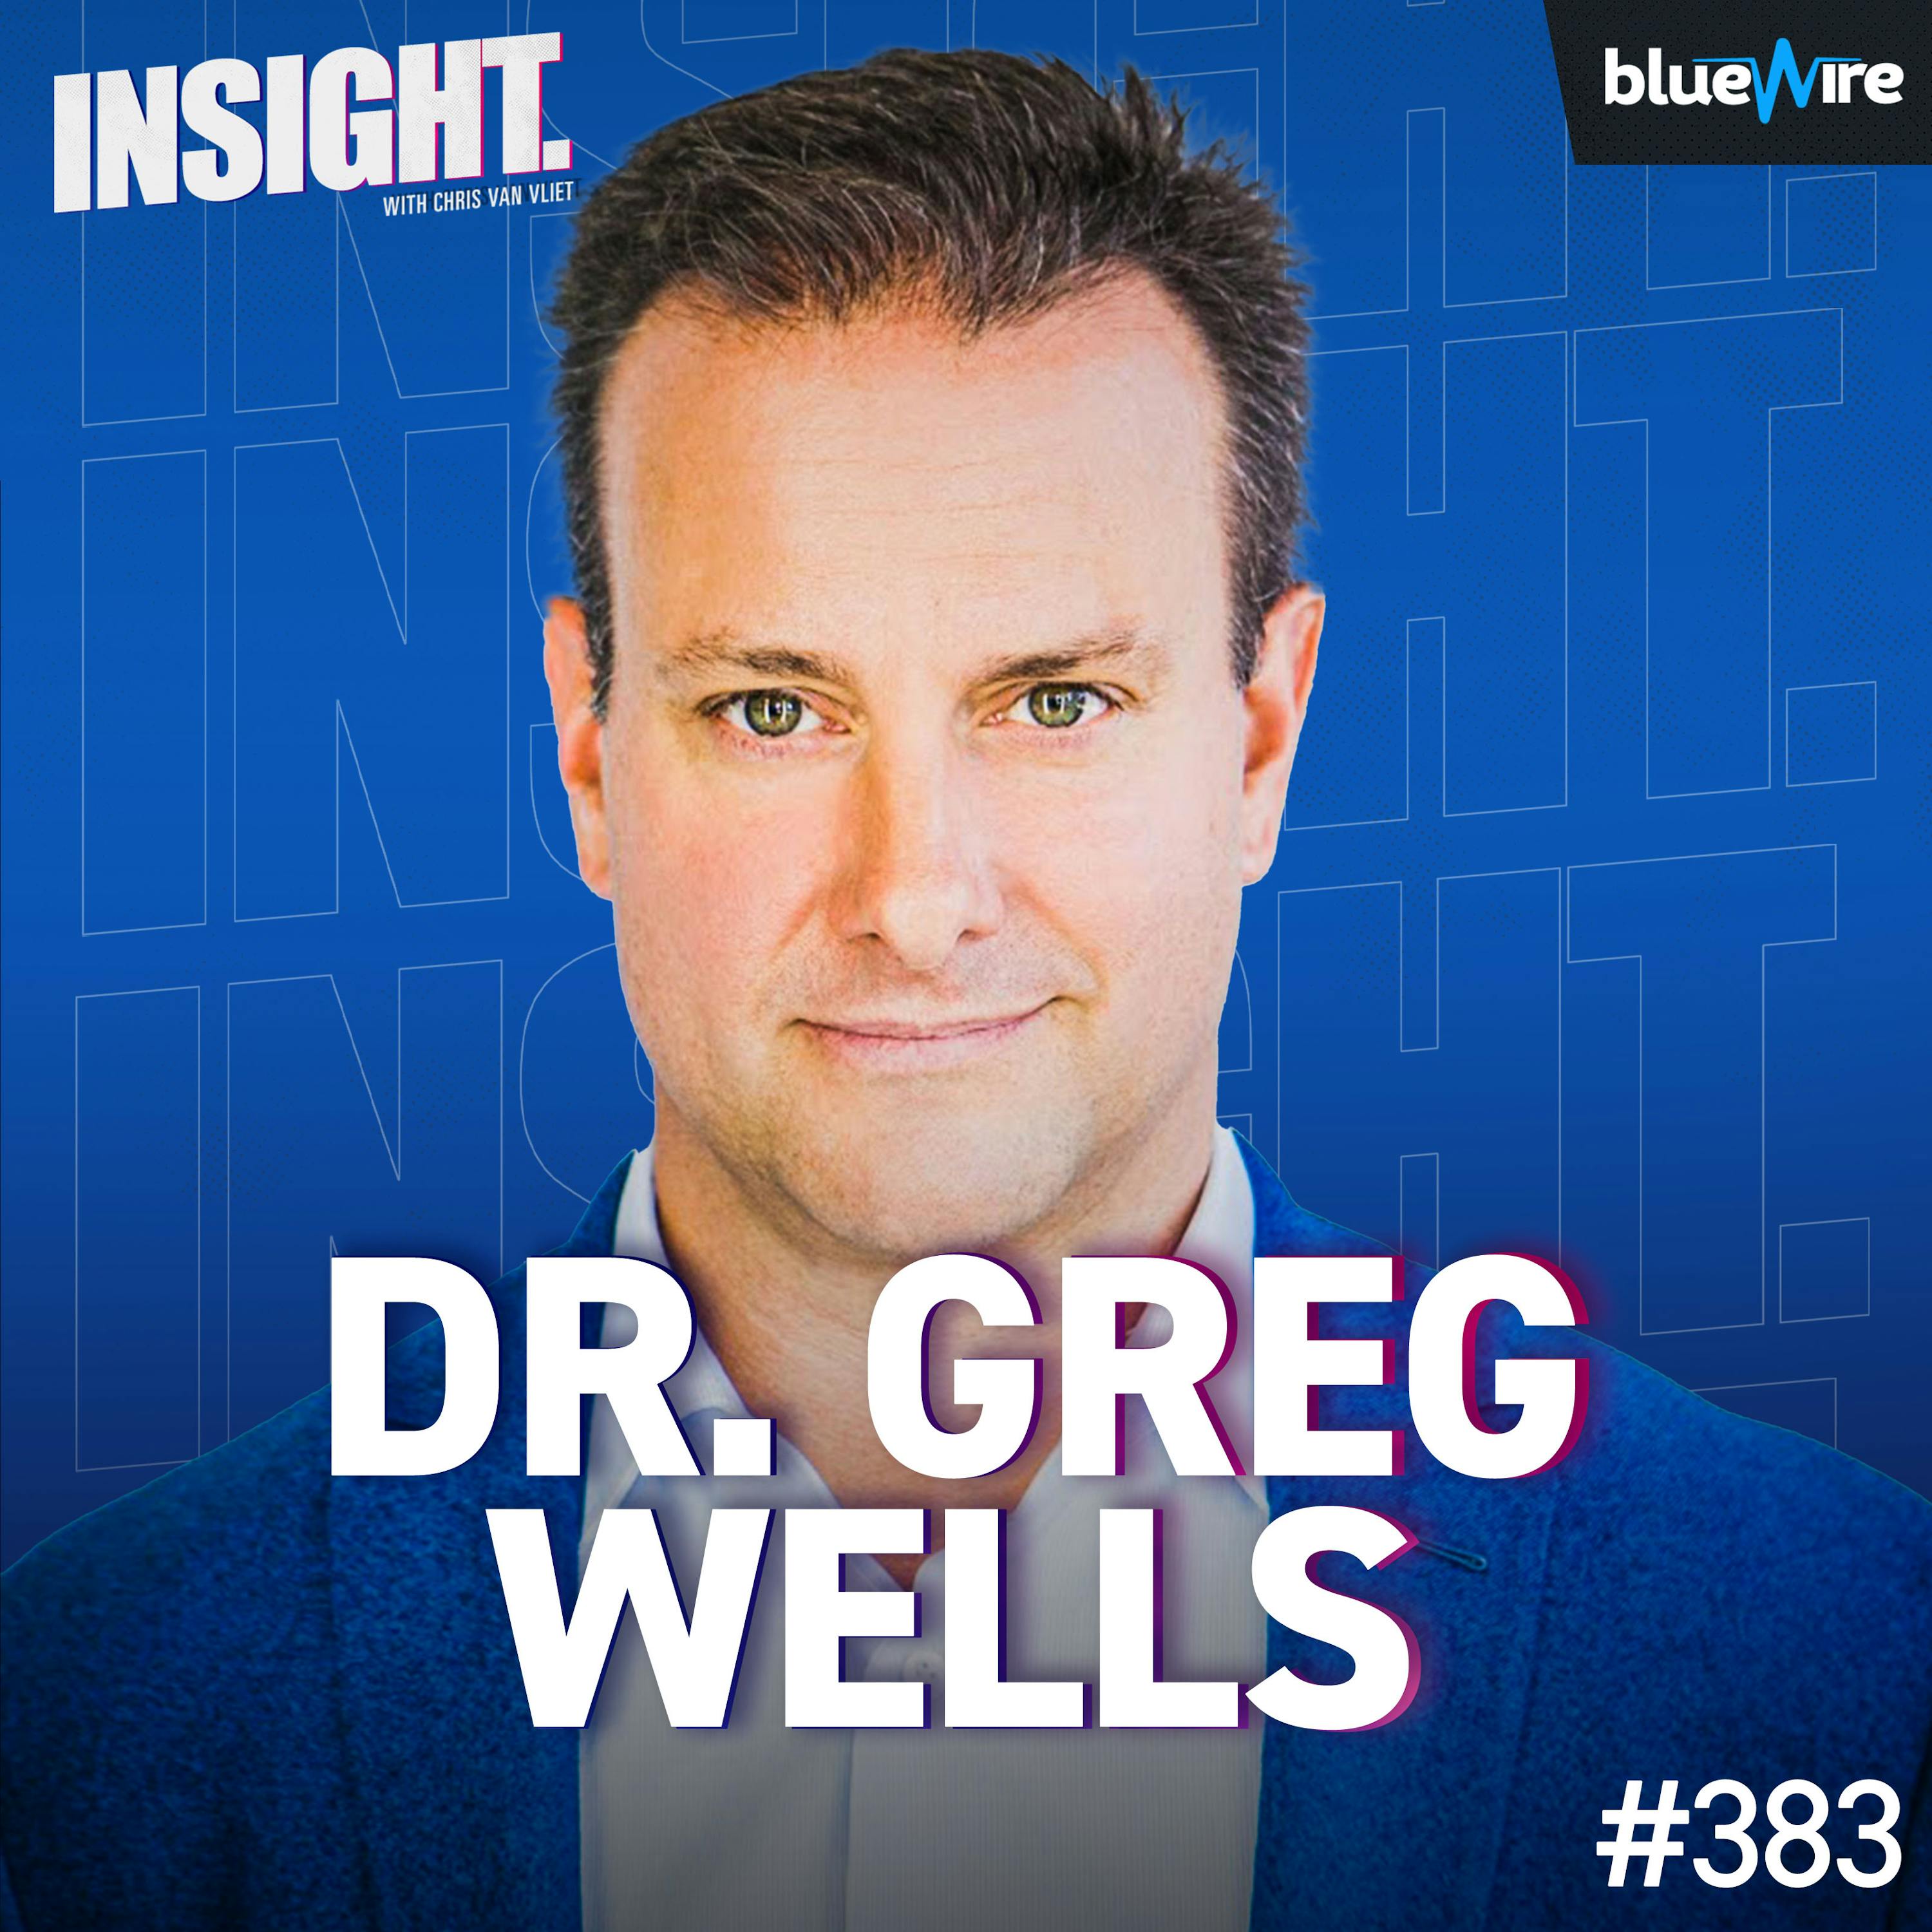 You're Sleeping All Wrong! Dr. Greg Wells On How To Get A Good Night's Sleep Starting TONIGHT